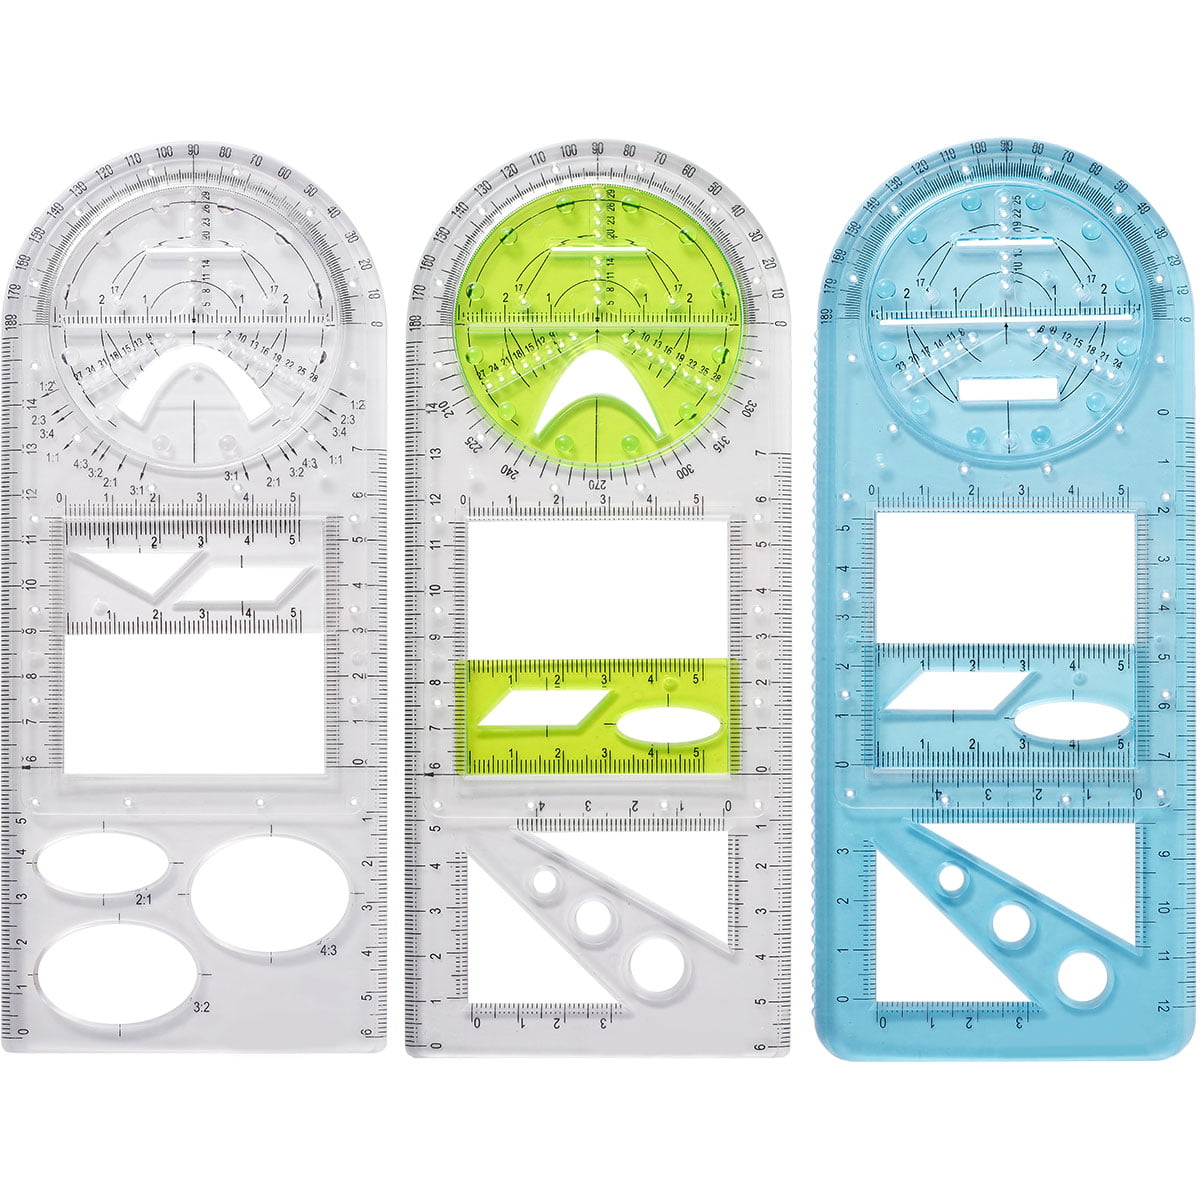  BUTIFULSIC 2Pcs Circle Template Circle Stencil Geometry Ruler Architecture  Supplies rulers for School Painting Tool Multi-Functional Geometric Ruler  Drawing Indoor Plastic Student : Office Products